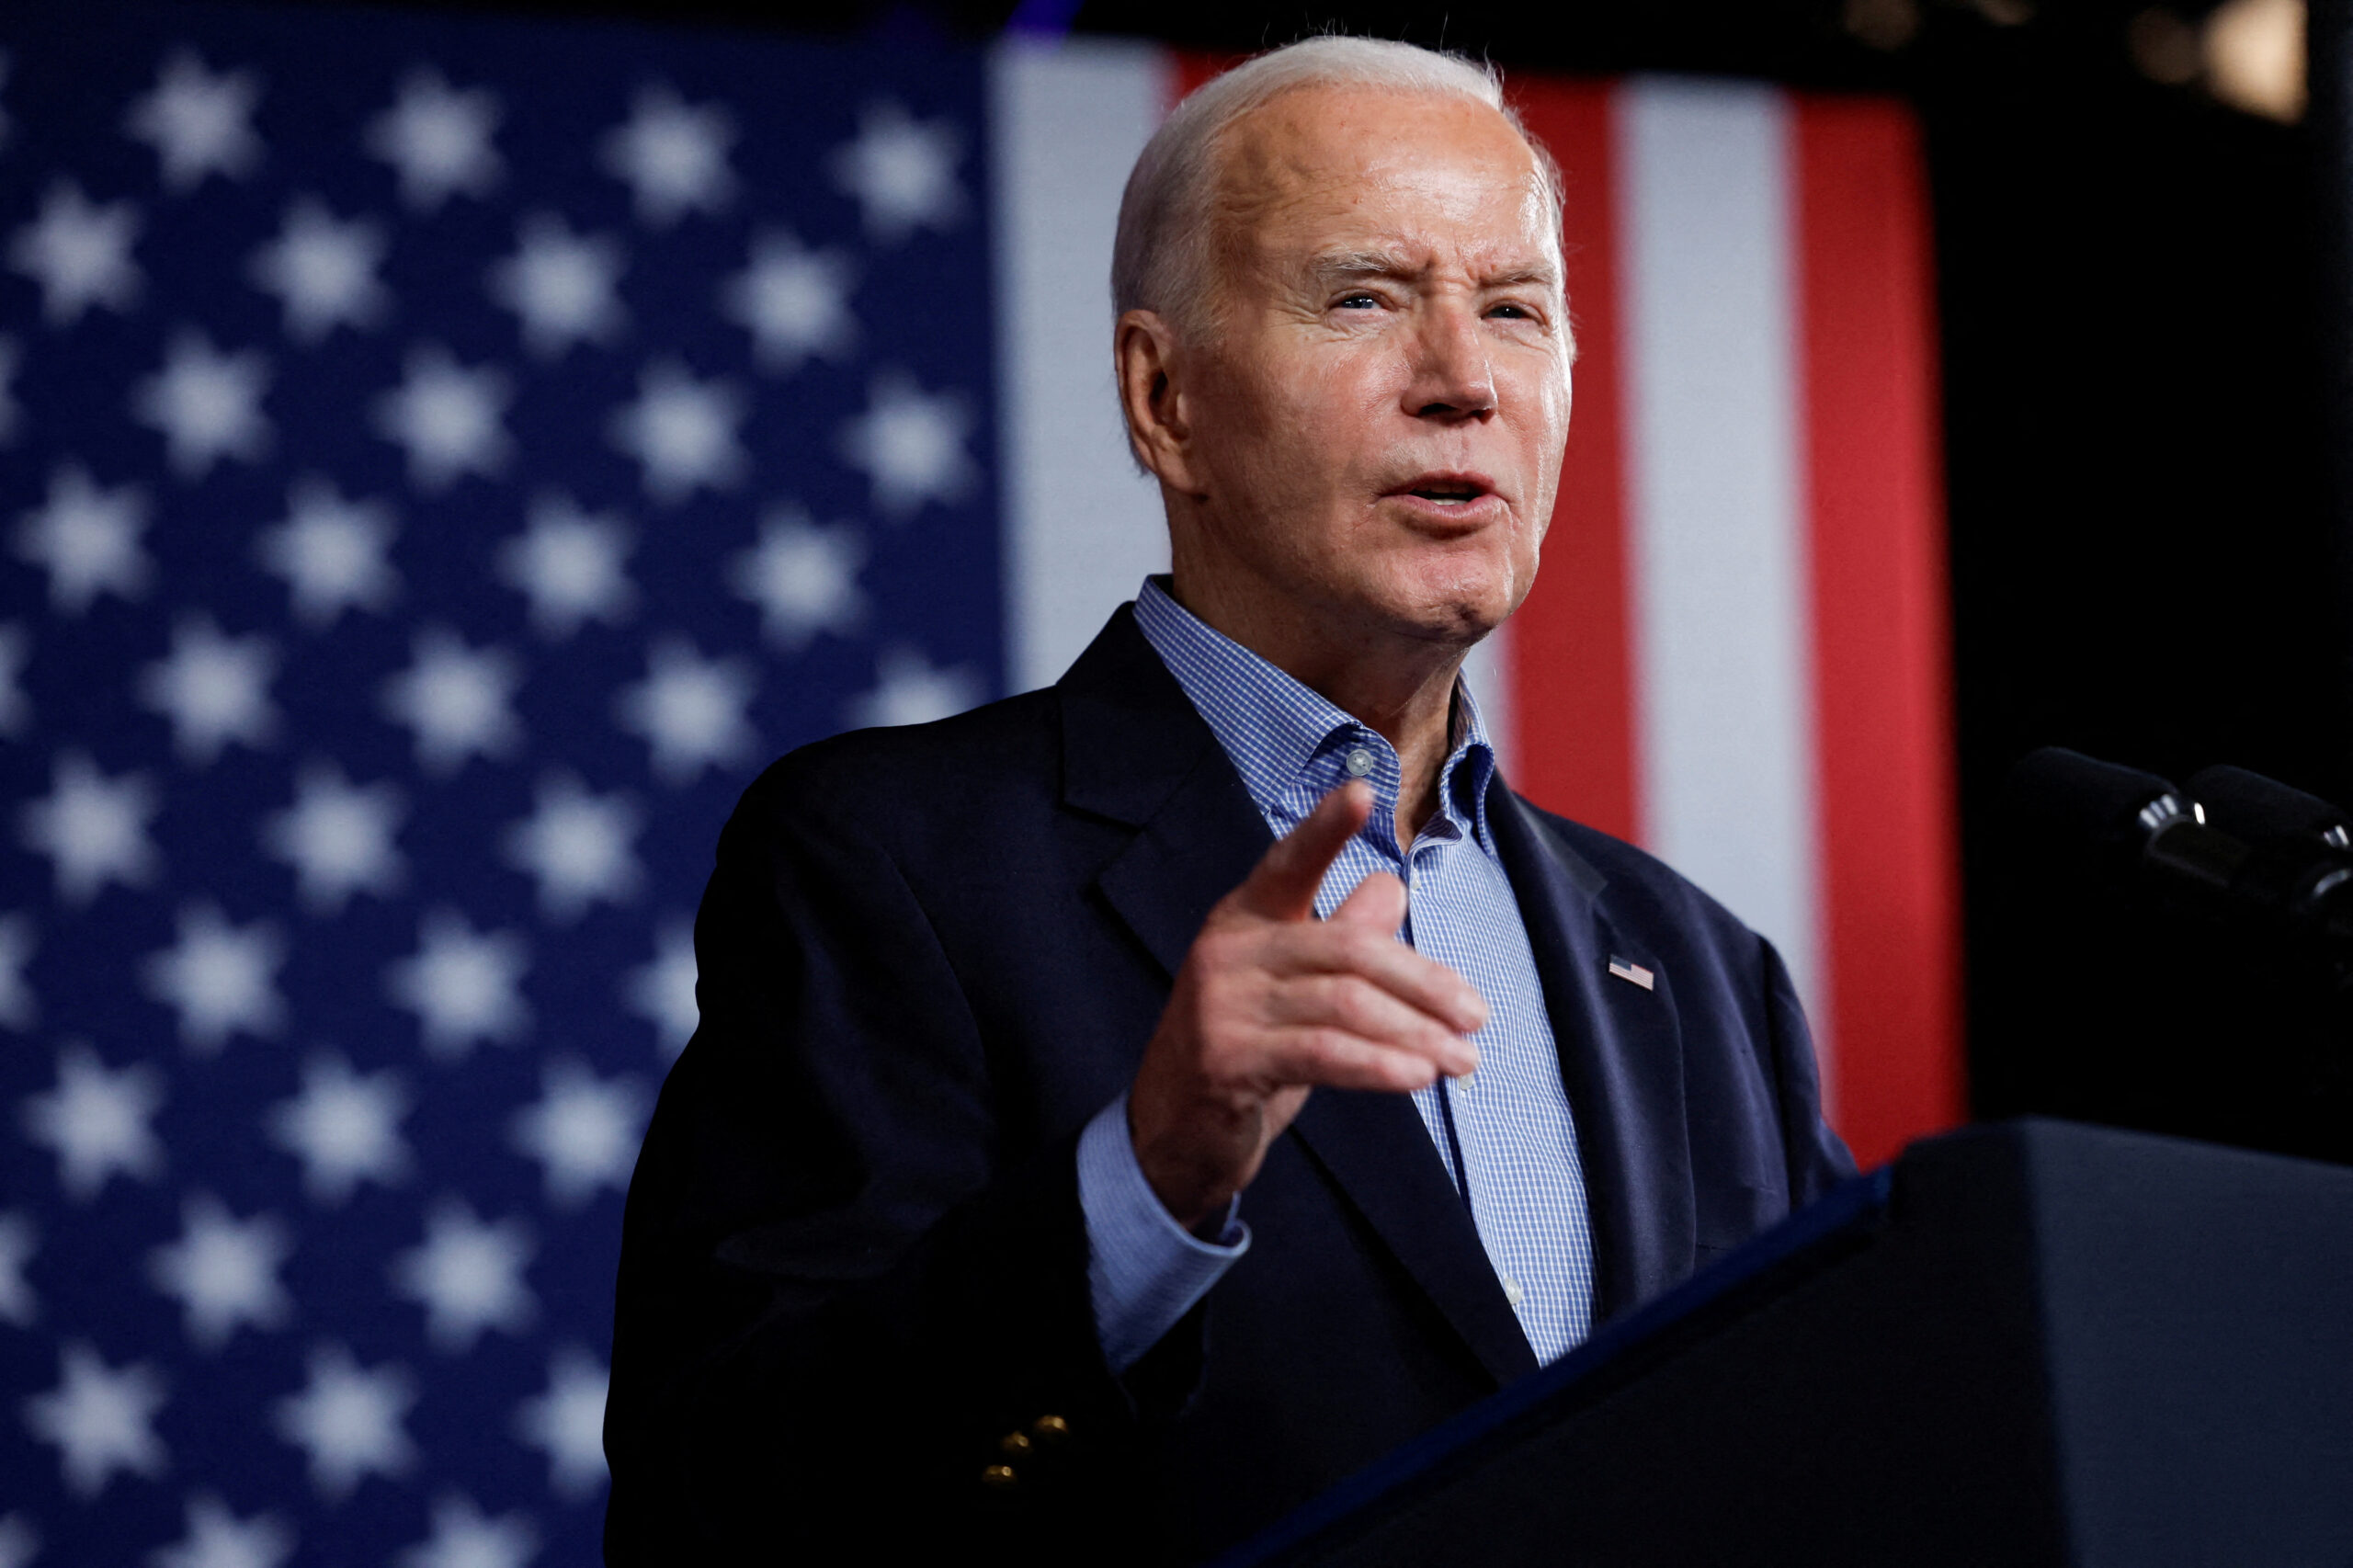 Biden clinches nomination, presidential rematch with Trump looms